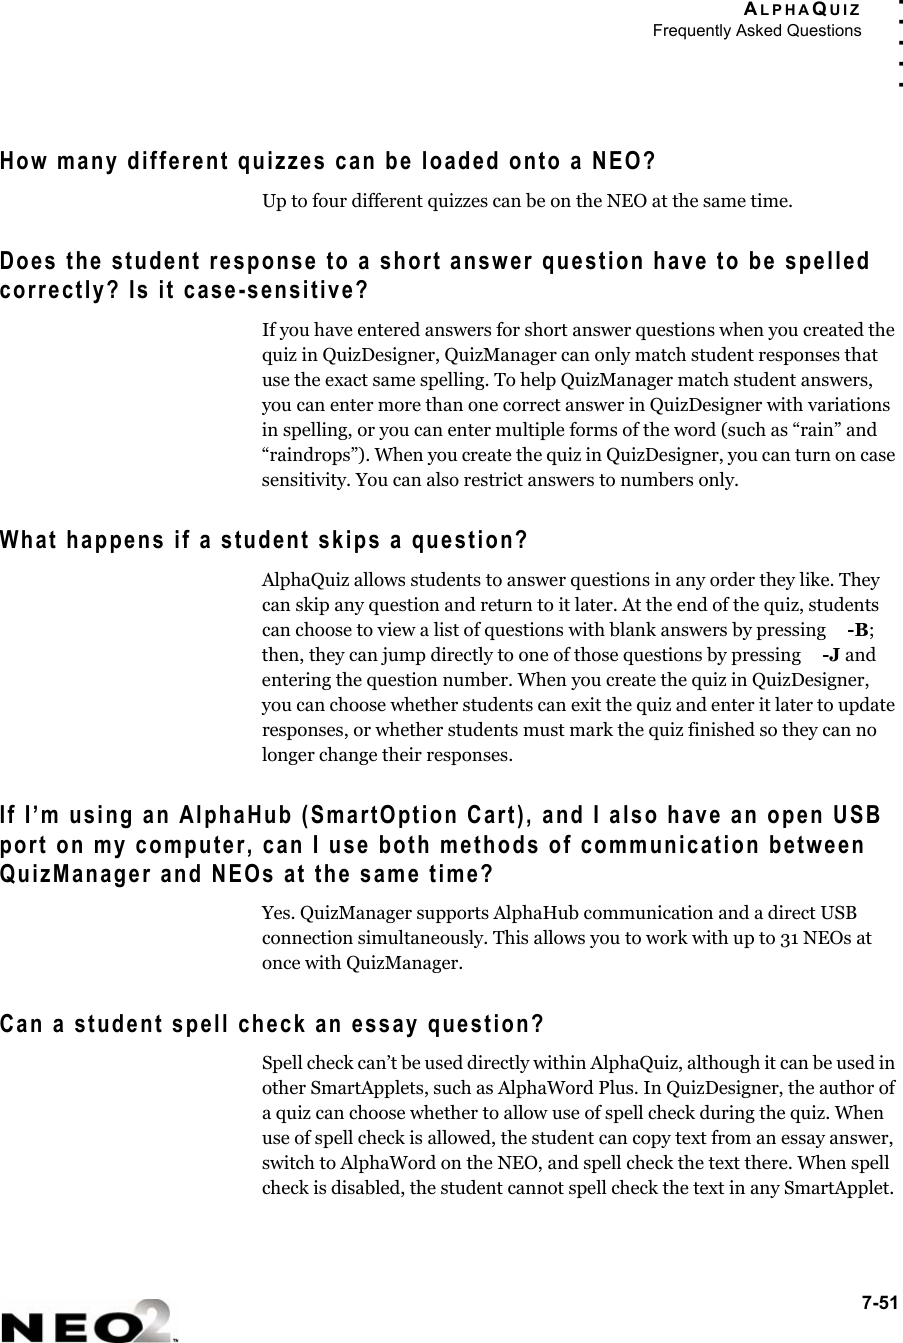 ALPHAQUIZFrequently Asked Questions7-51. . . . .How many different quizzes can be loaded onto a NEO?Up to four different quizzes can be on the NEO at the same time.Does the student response to a short answer question have to be spelled correctly? Is it case-sensitive?If you have entered answers for short answer questions when you created the quiz in QuizDesigner, QuizManager can only match student responses that use the exact same spelling. To help QuizManager match student answers, you can enter more than one correct answer in QuizDesigner with variations in spelling, or you can enter multiple forms of the word (such as “rain” and “raindrops”). When you create the quiz in QuizDesigner, you can turn on case sensitivity. You can also restrict answers to numbers only.What happens if a student skips a question?AlphaQuiz allows students to answer questions in any order they like. They can skip any question and return to it later. At the end of the quiz, students can choose to view a list of questions with blank answers by pressing  -B; then, they can jump directly to one of those questions by pressing  -J and entering the question number. When you create the quiz in QuizDesigner, you can choose whether students can exit the quiz and enter it later to update responses, or whether students must mark the quiz finished so they can no longer change their responses.If I’m using an AlphaHub (SmartOption Cart), and I also have an open USB port on my computer, can I use both methods of communication between QuizManager and NEOs at the same time?Yes. QuizManager supports AlphaHub communication and a direct USB connection simultaneously. This allows you to work with up to 31 NEOs at once with QuizManager.Can a student spell check an essay question?Spell check can’t be used directly within AlphaQuiz, although it can be used in other SmartApplets, such as AlphaWord Plus. In QuizDesigner, the author of a quiz can choose whether to allow use of spell check during the quiz. When use of spell check is allowed, the student can copy text from an essay answer, switch to AlphaWord on the NEO, and spell check the text there. When spell check is disabled, the student cannot spell check the text in any SmartApplet. 